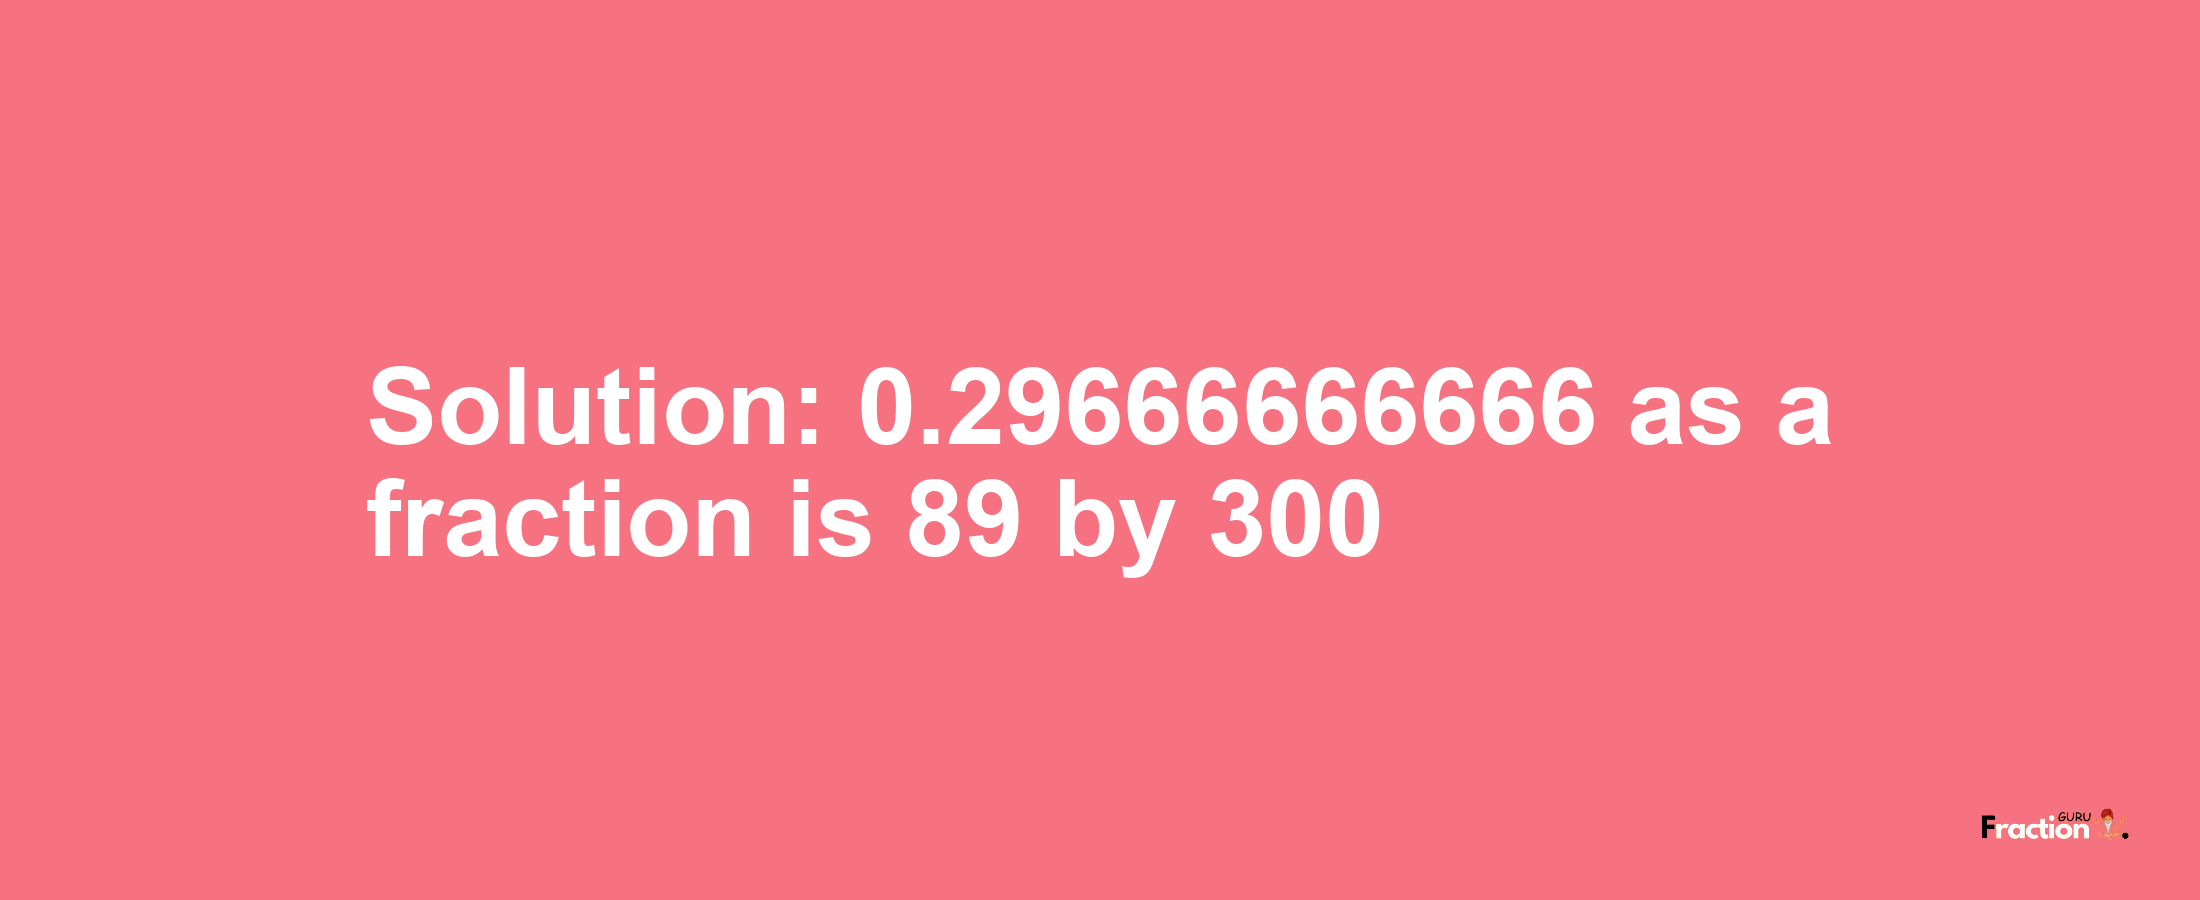 Solution:0.29666666666 as a fraction is 89/300